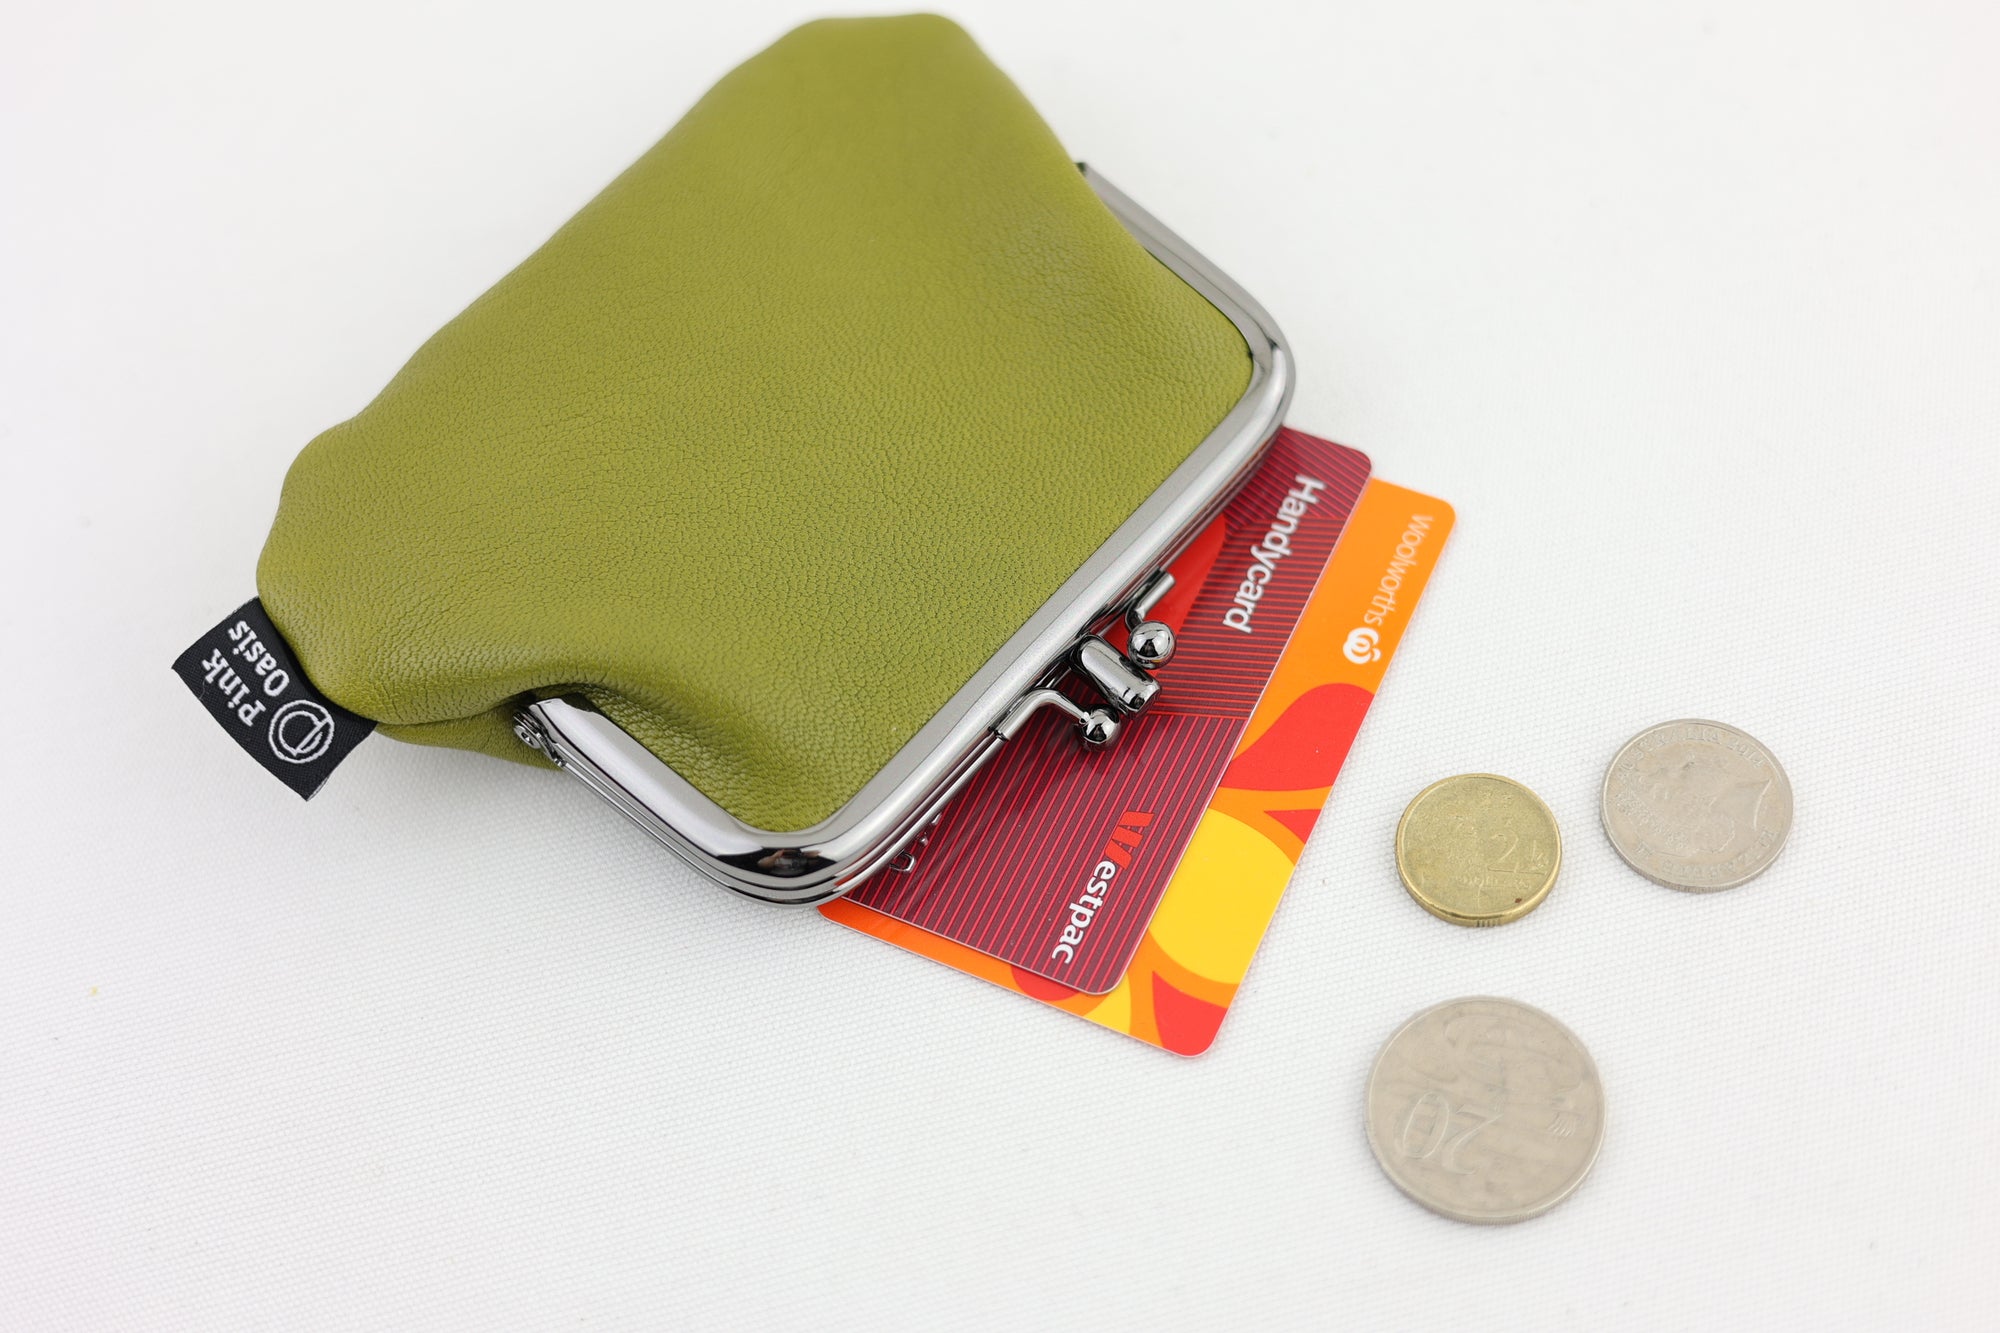 Green Leather Coin Purse Handmade in Australia | PINK OASIS